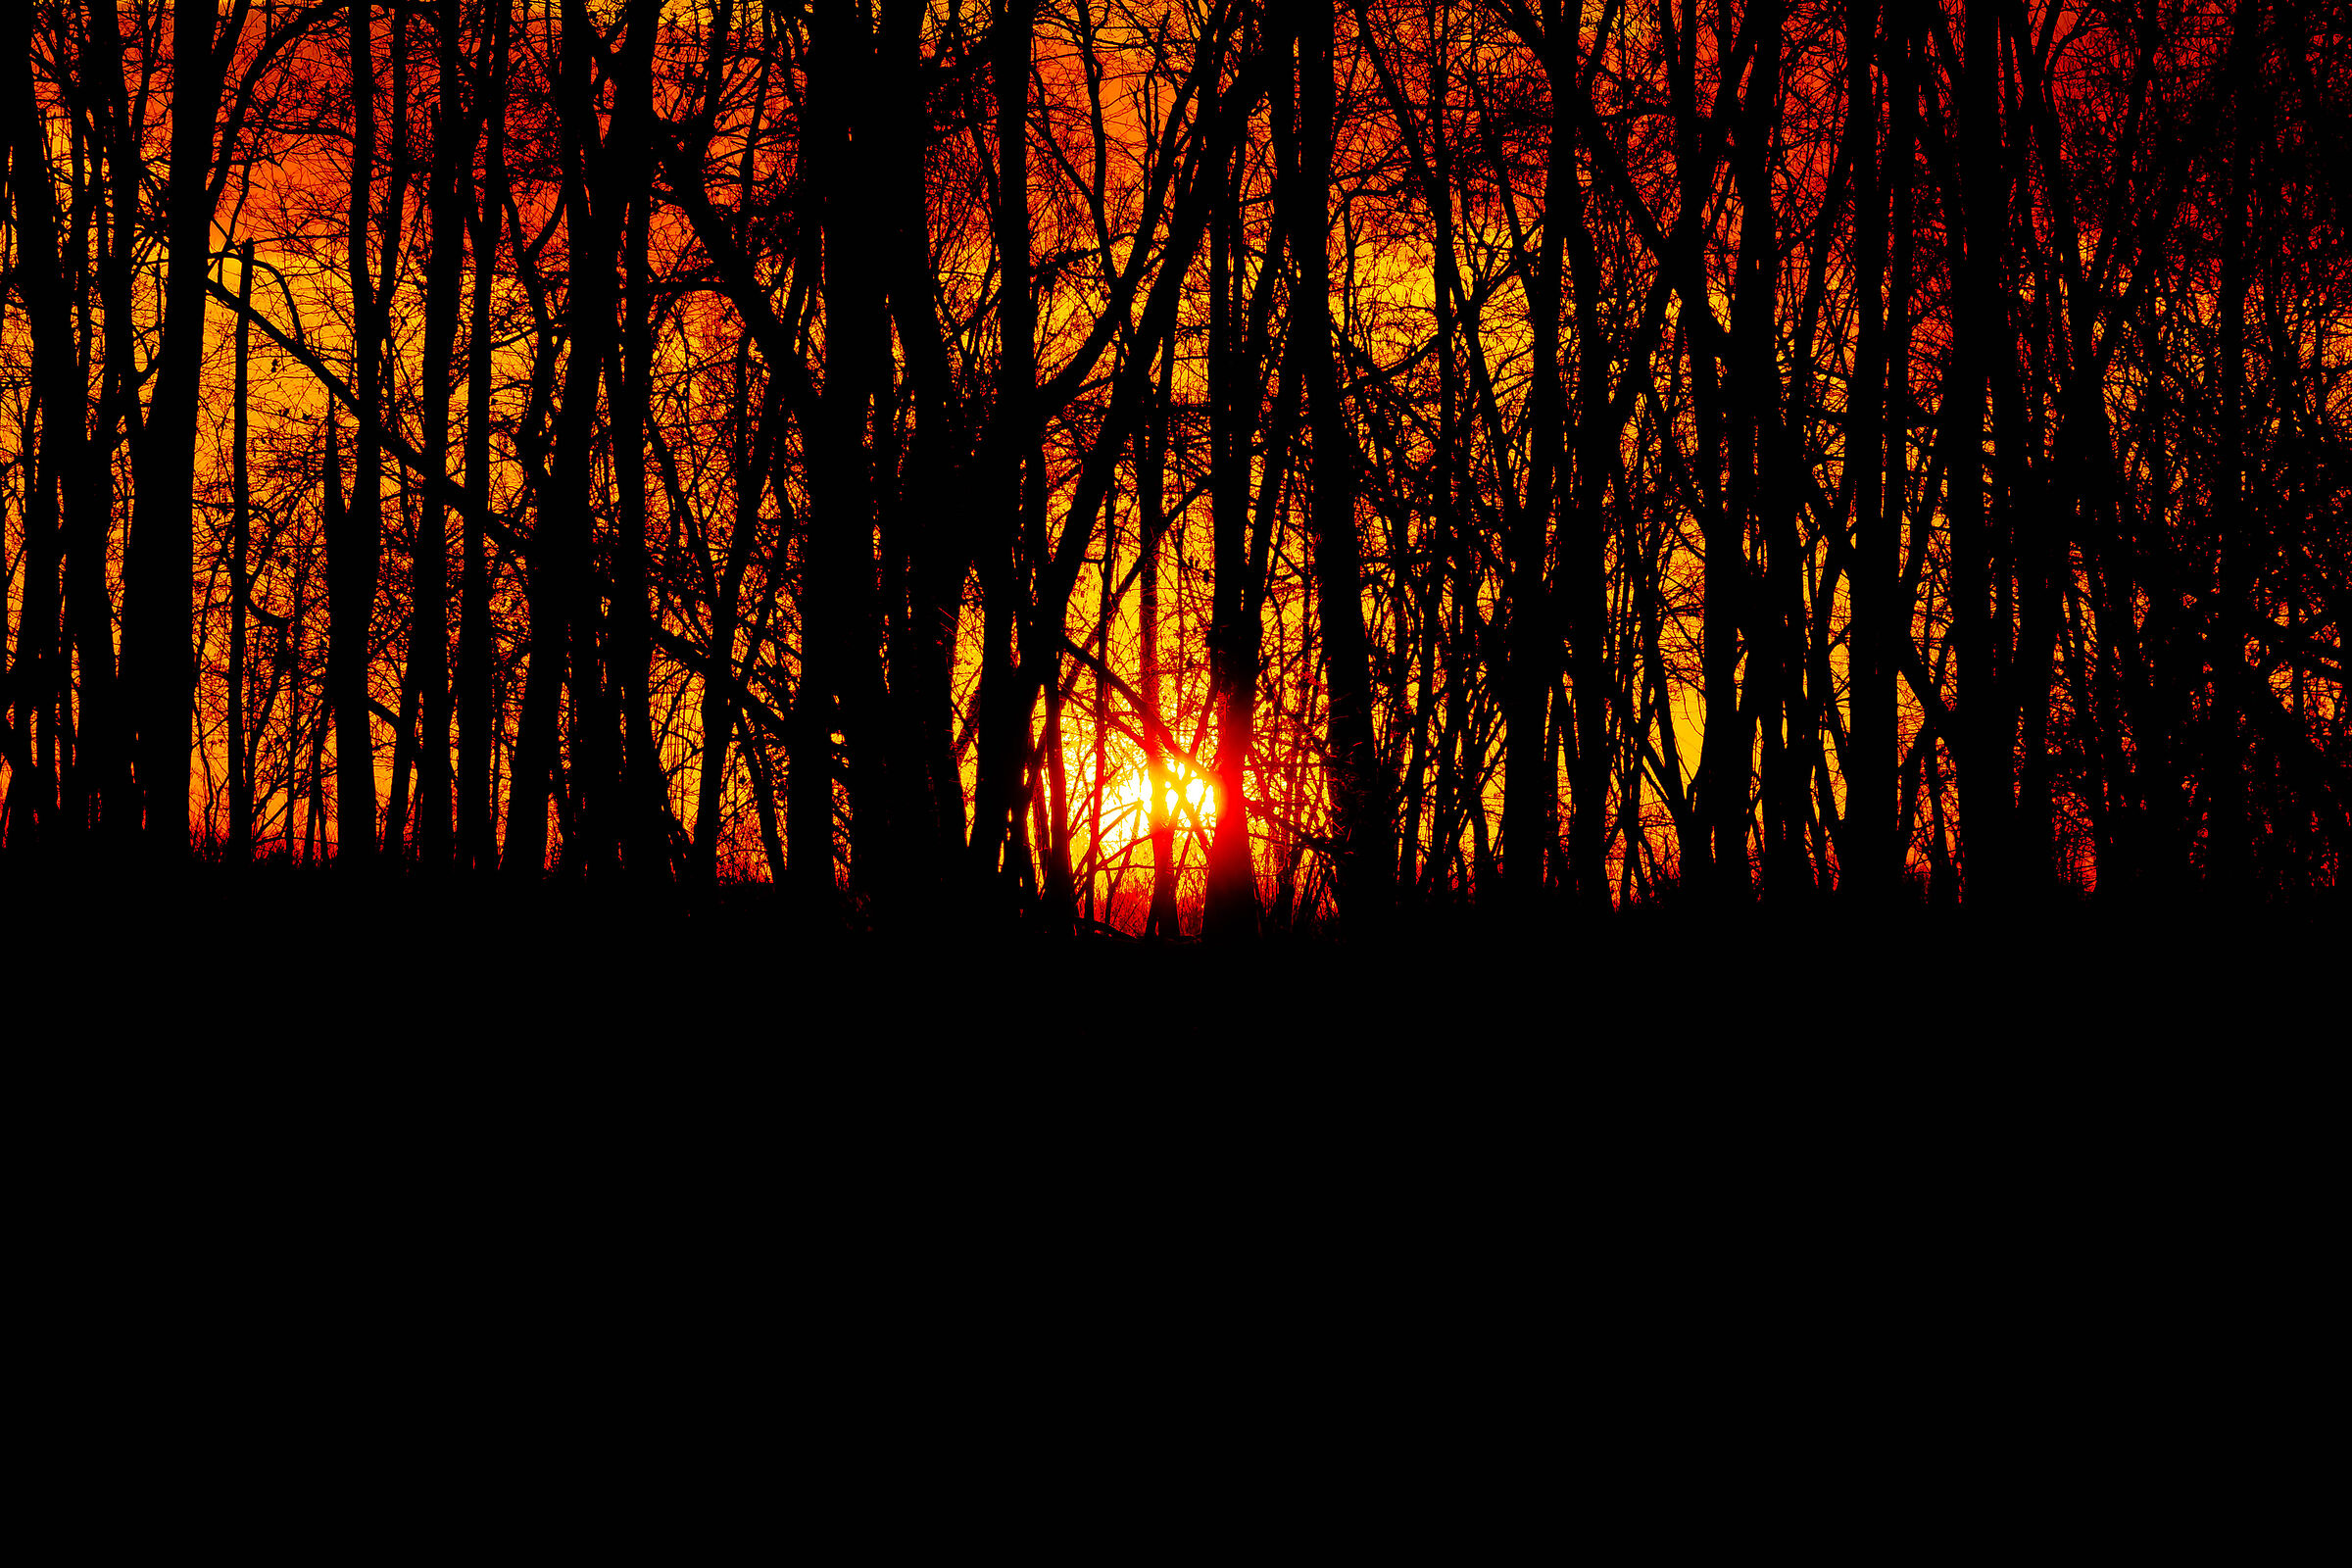 The sunset in the trees...